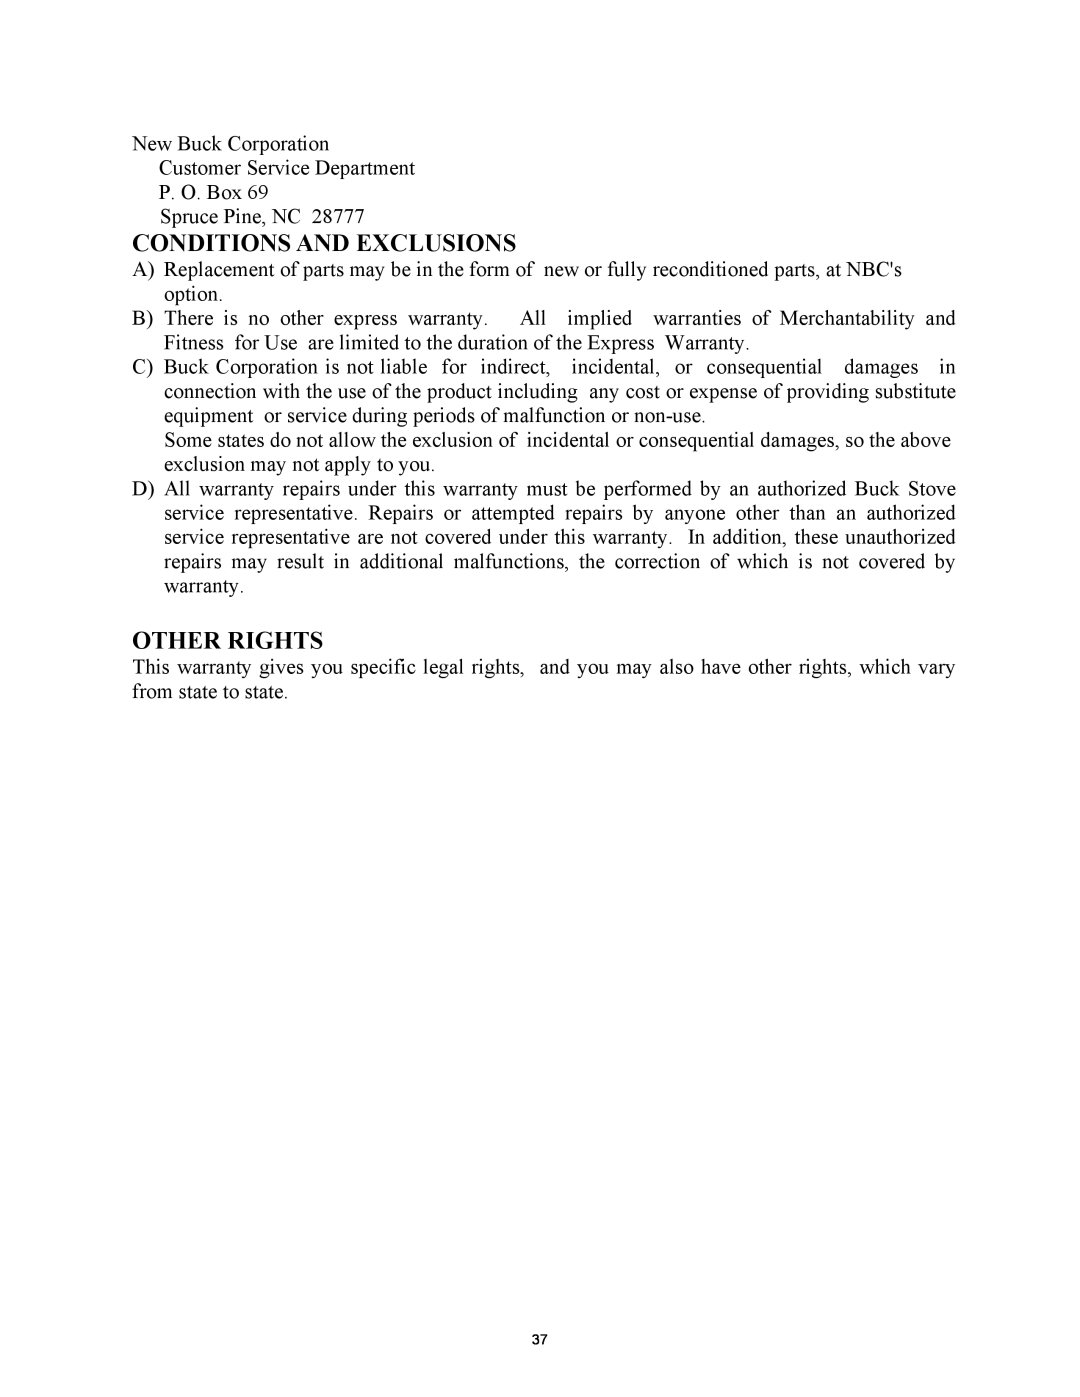 New Buck Corporation 85 installation instructions Conditions And Exclusions, Other Rights 